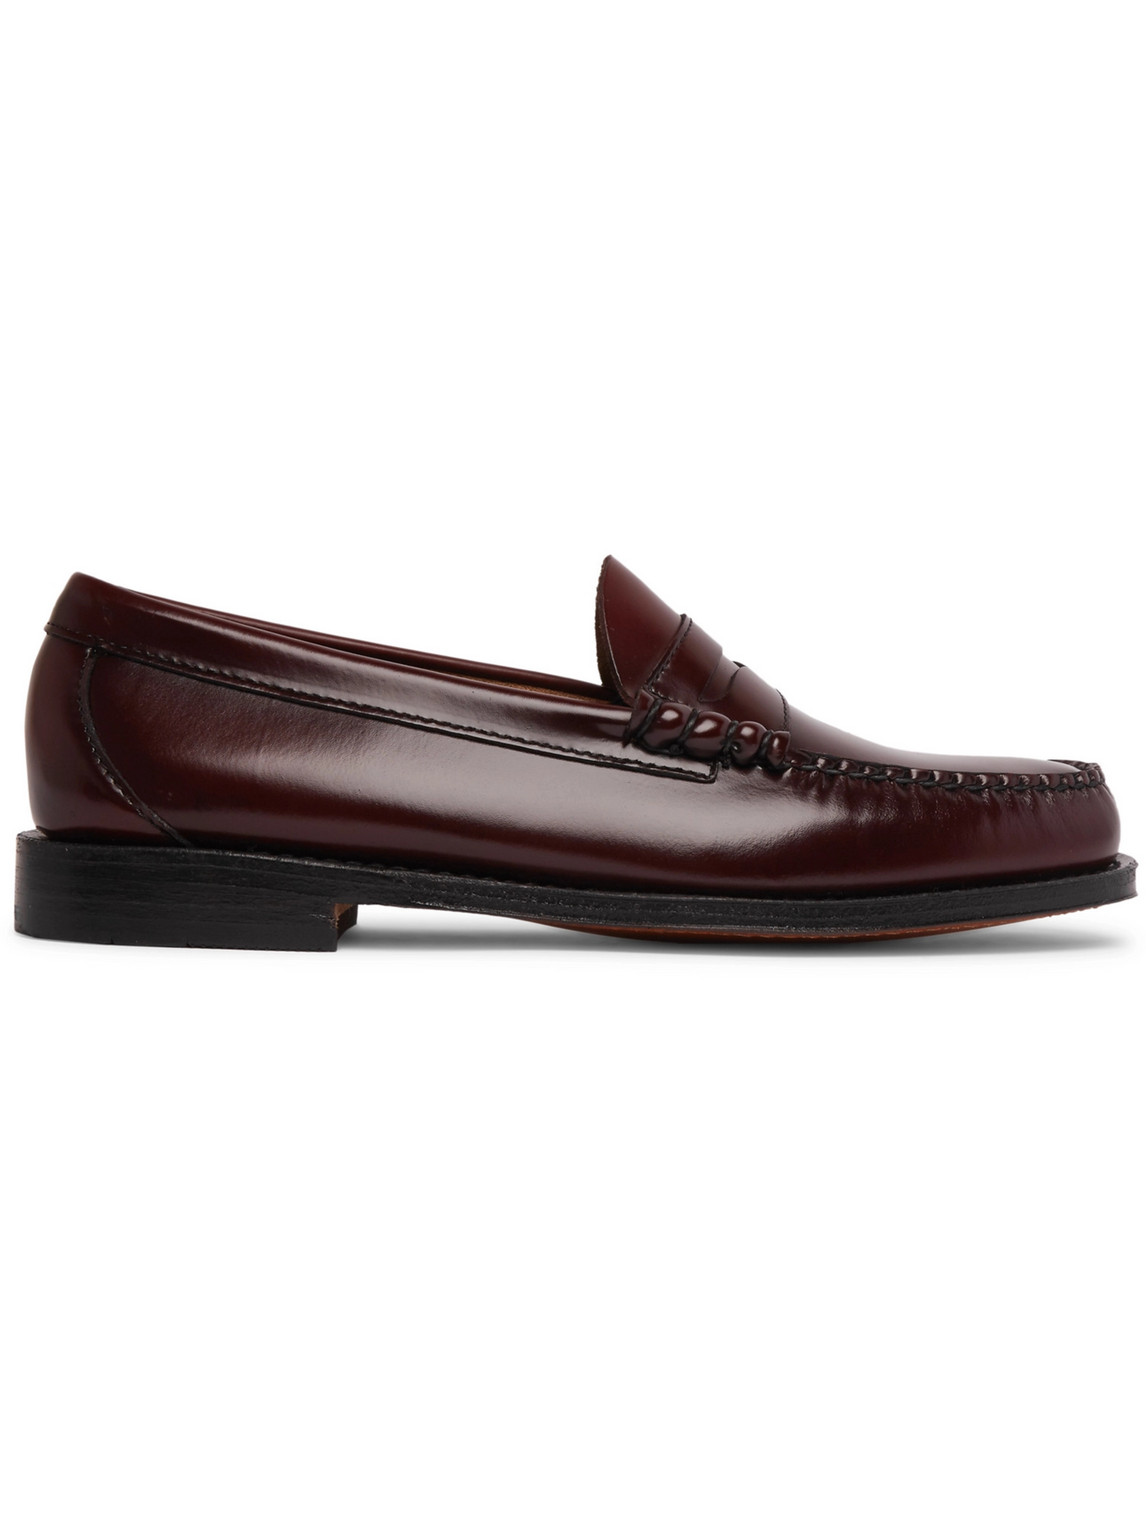 G.H. Bass & Co. - Weejuns Heritage Larson Leather Penny Loafers - Men - Burgundy - UK 9.5 von G.H. Bass & Co.